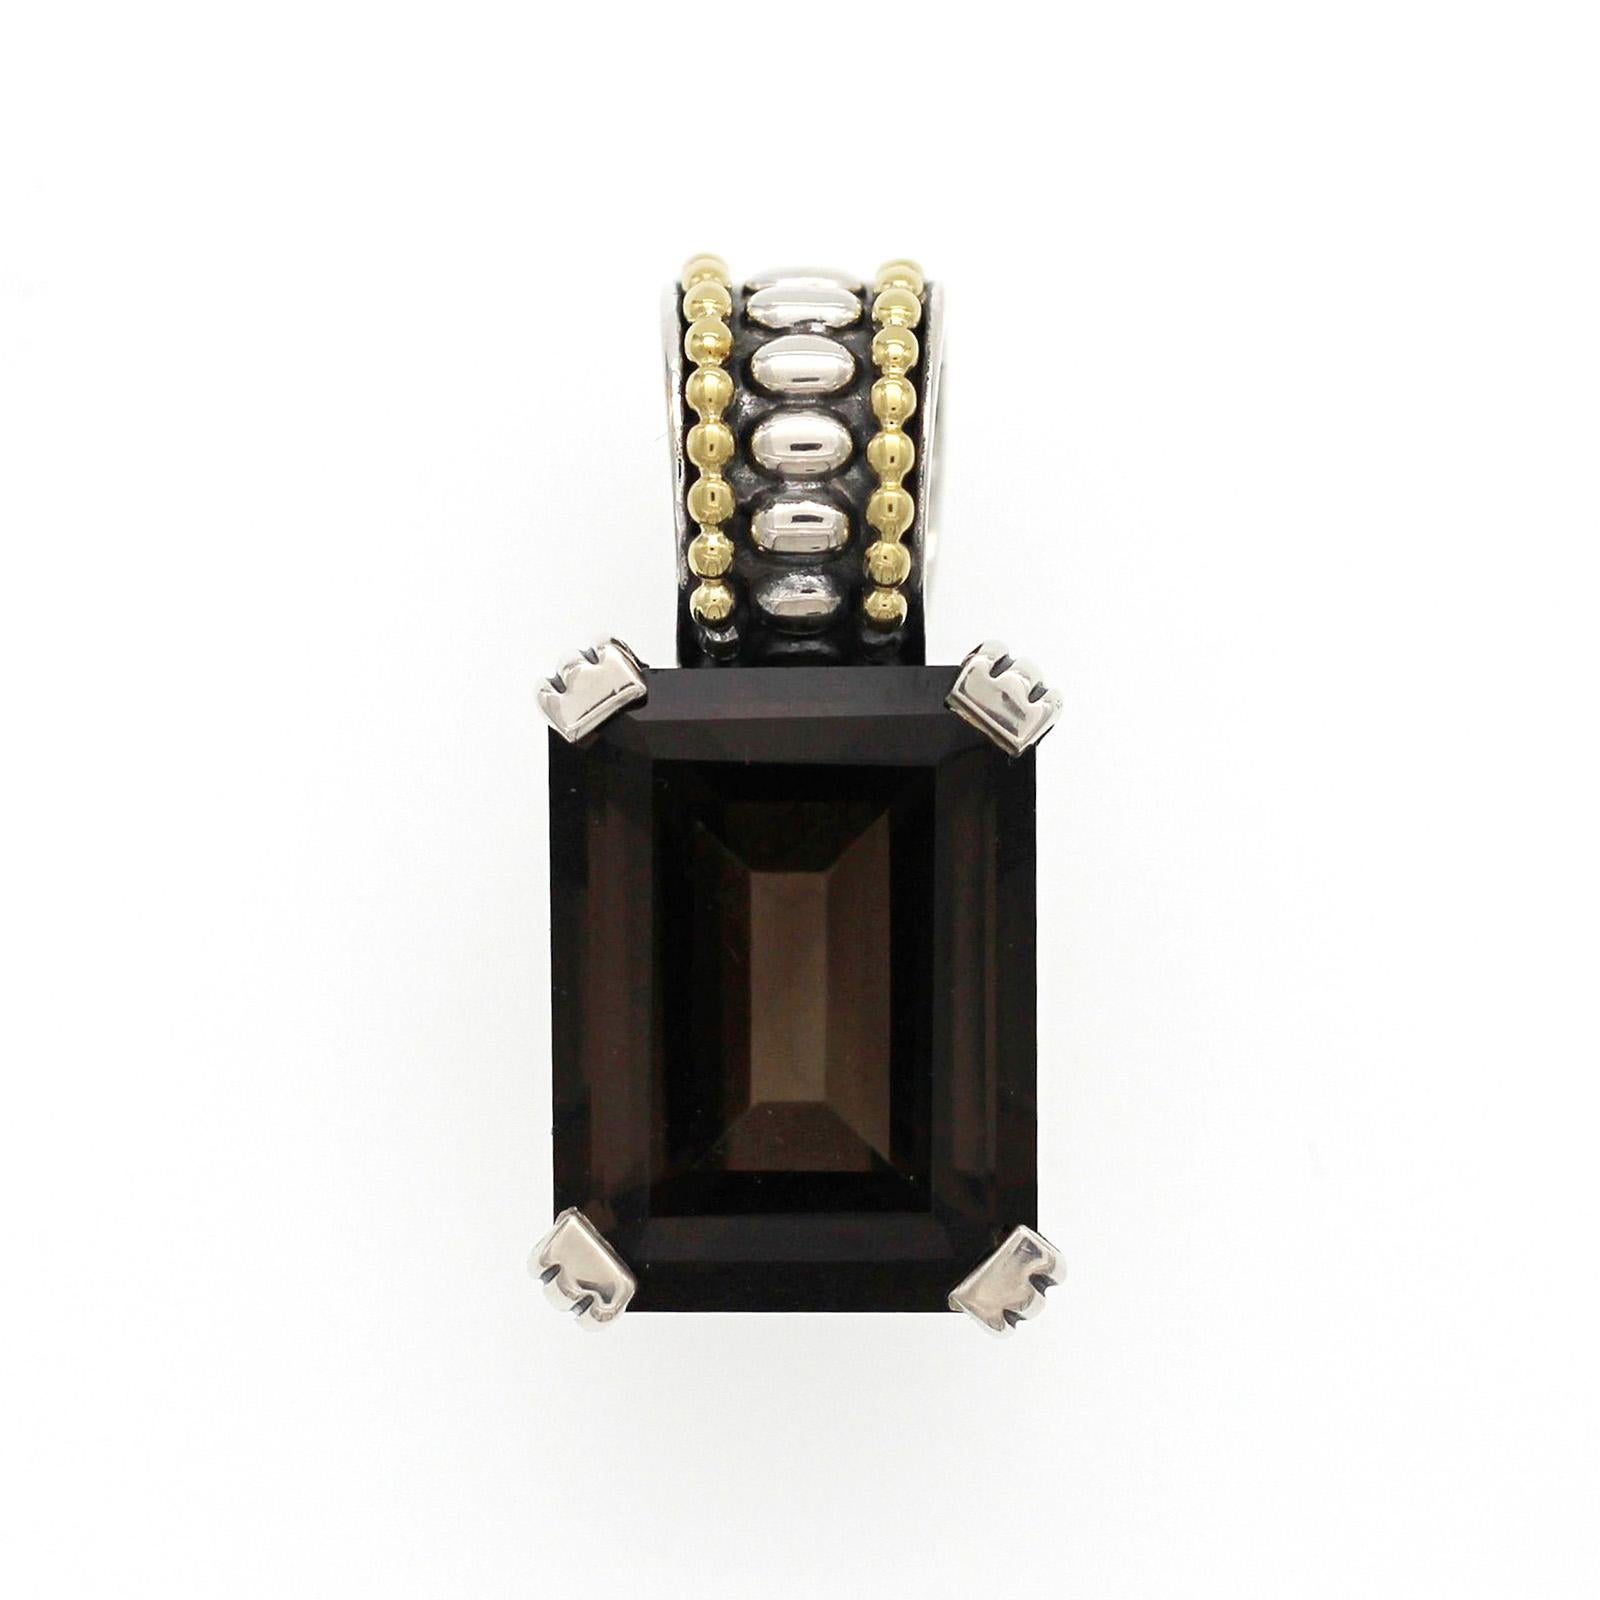 100% Authentic, 100% Customer Satisfaction

Height: 33.5 mm

Width: 15 mm

Metal: 925 Sterling Silver& 18K Yellow Gold 

Stone Type: Smoke Topaz

Hallmark: CAVIAR 925 750

Total Weight: 12.9 Grams

Condition: Pre Owned

Estimated Retail Price: